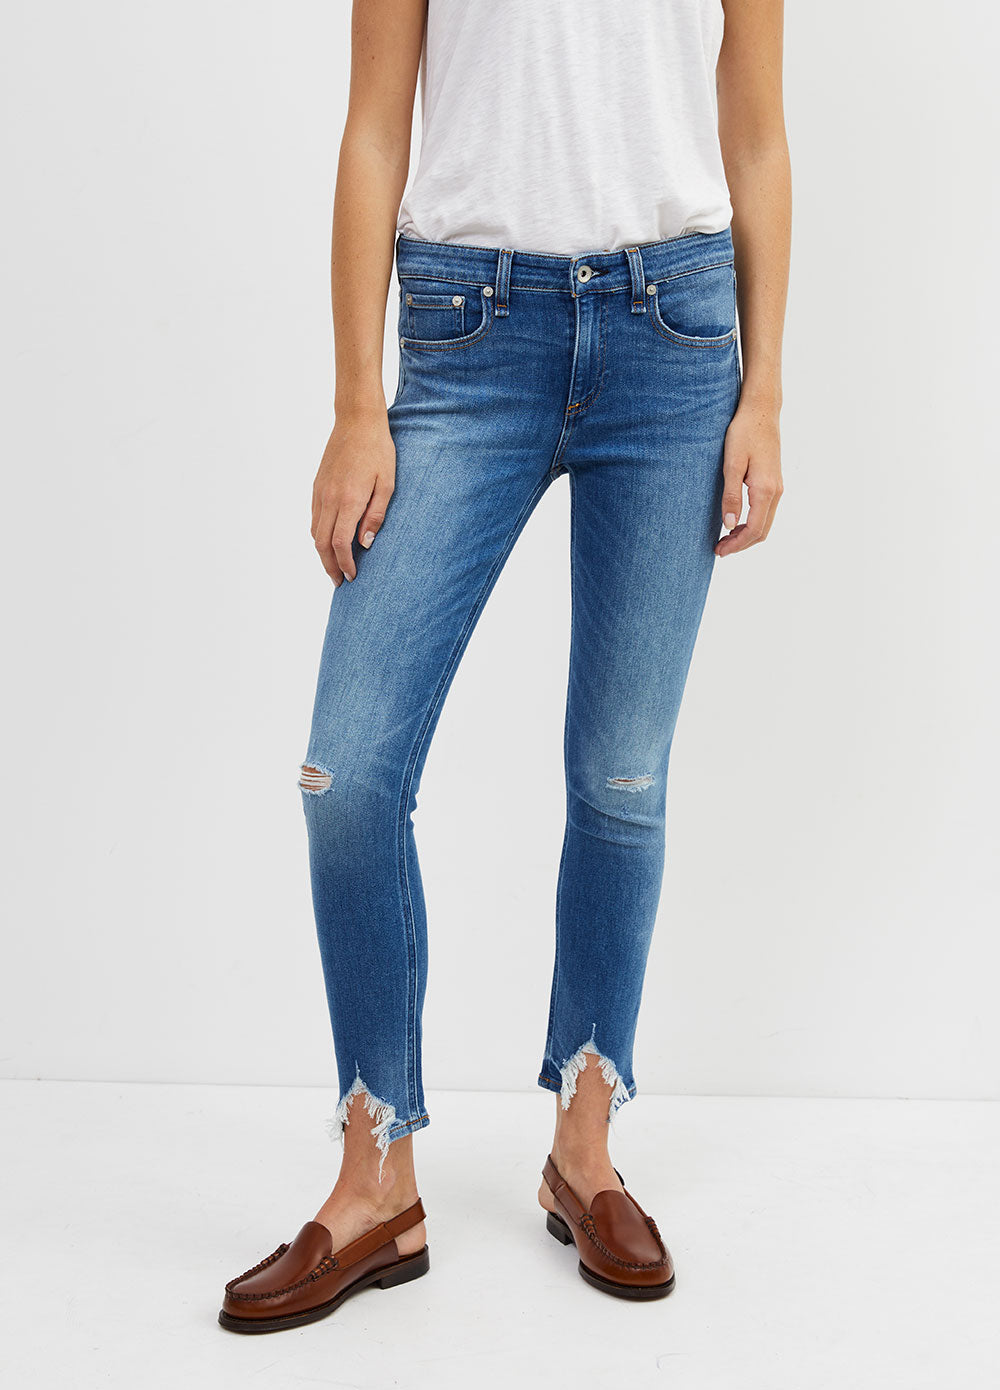 Cate Mid-rise Ankle Skinny Jeans